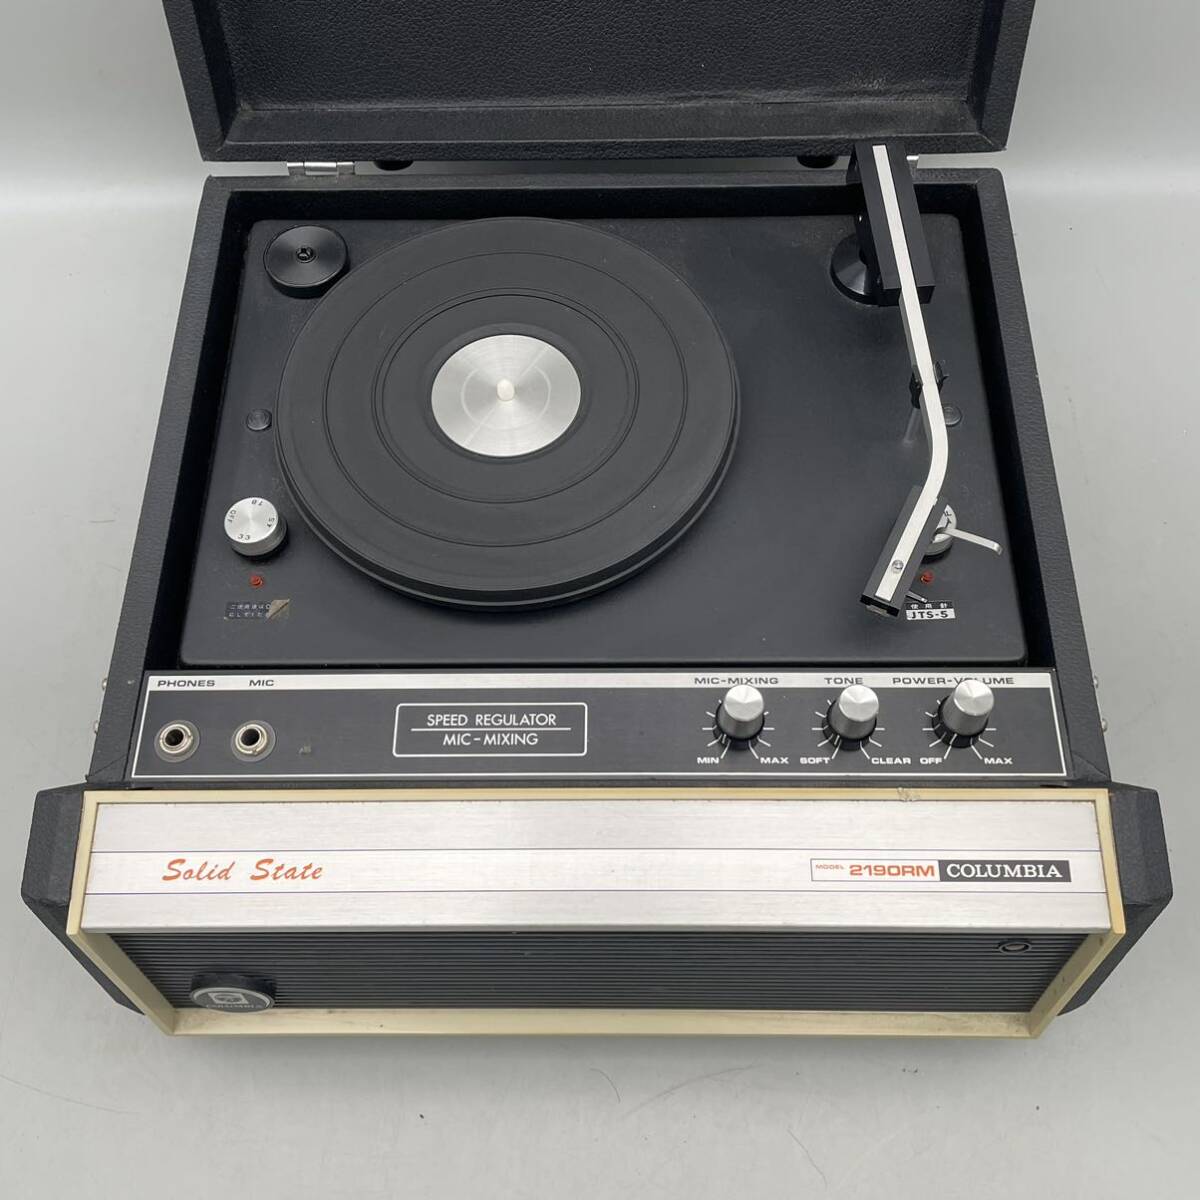 COLUMBIAko rom Via record player Solid State 2190RM turntable body Colombia Showa Retro that time thing antique Vintage 